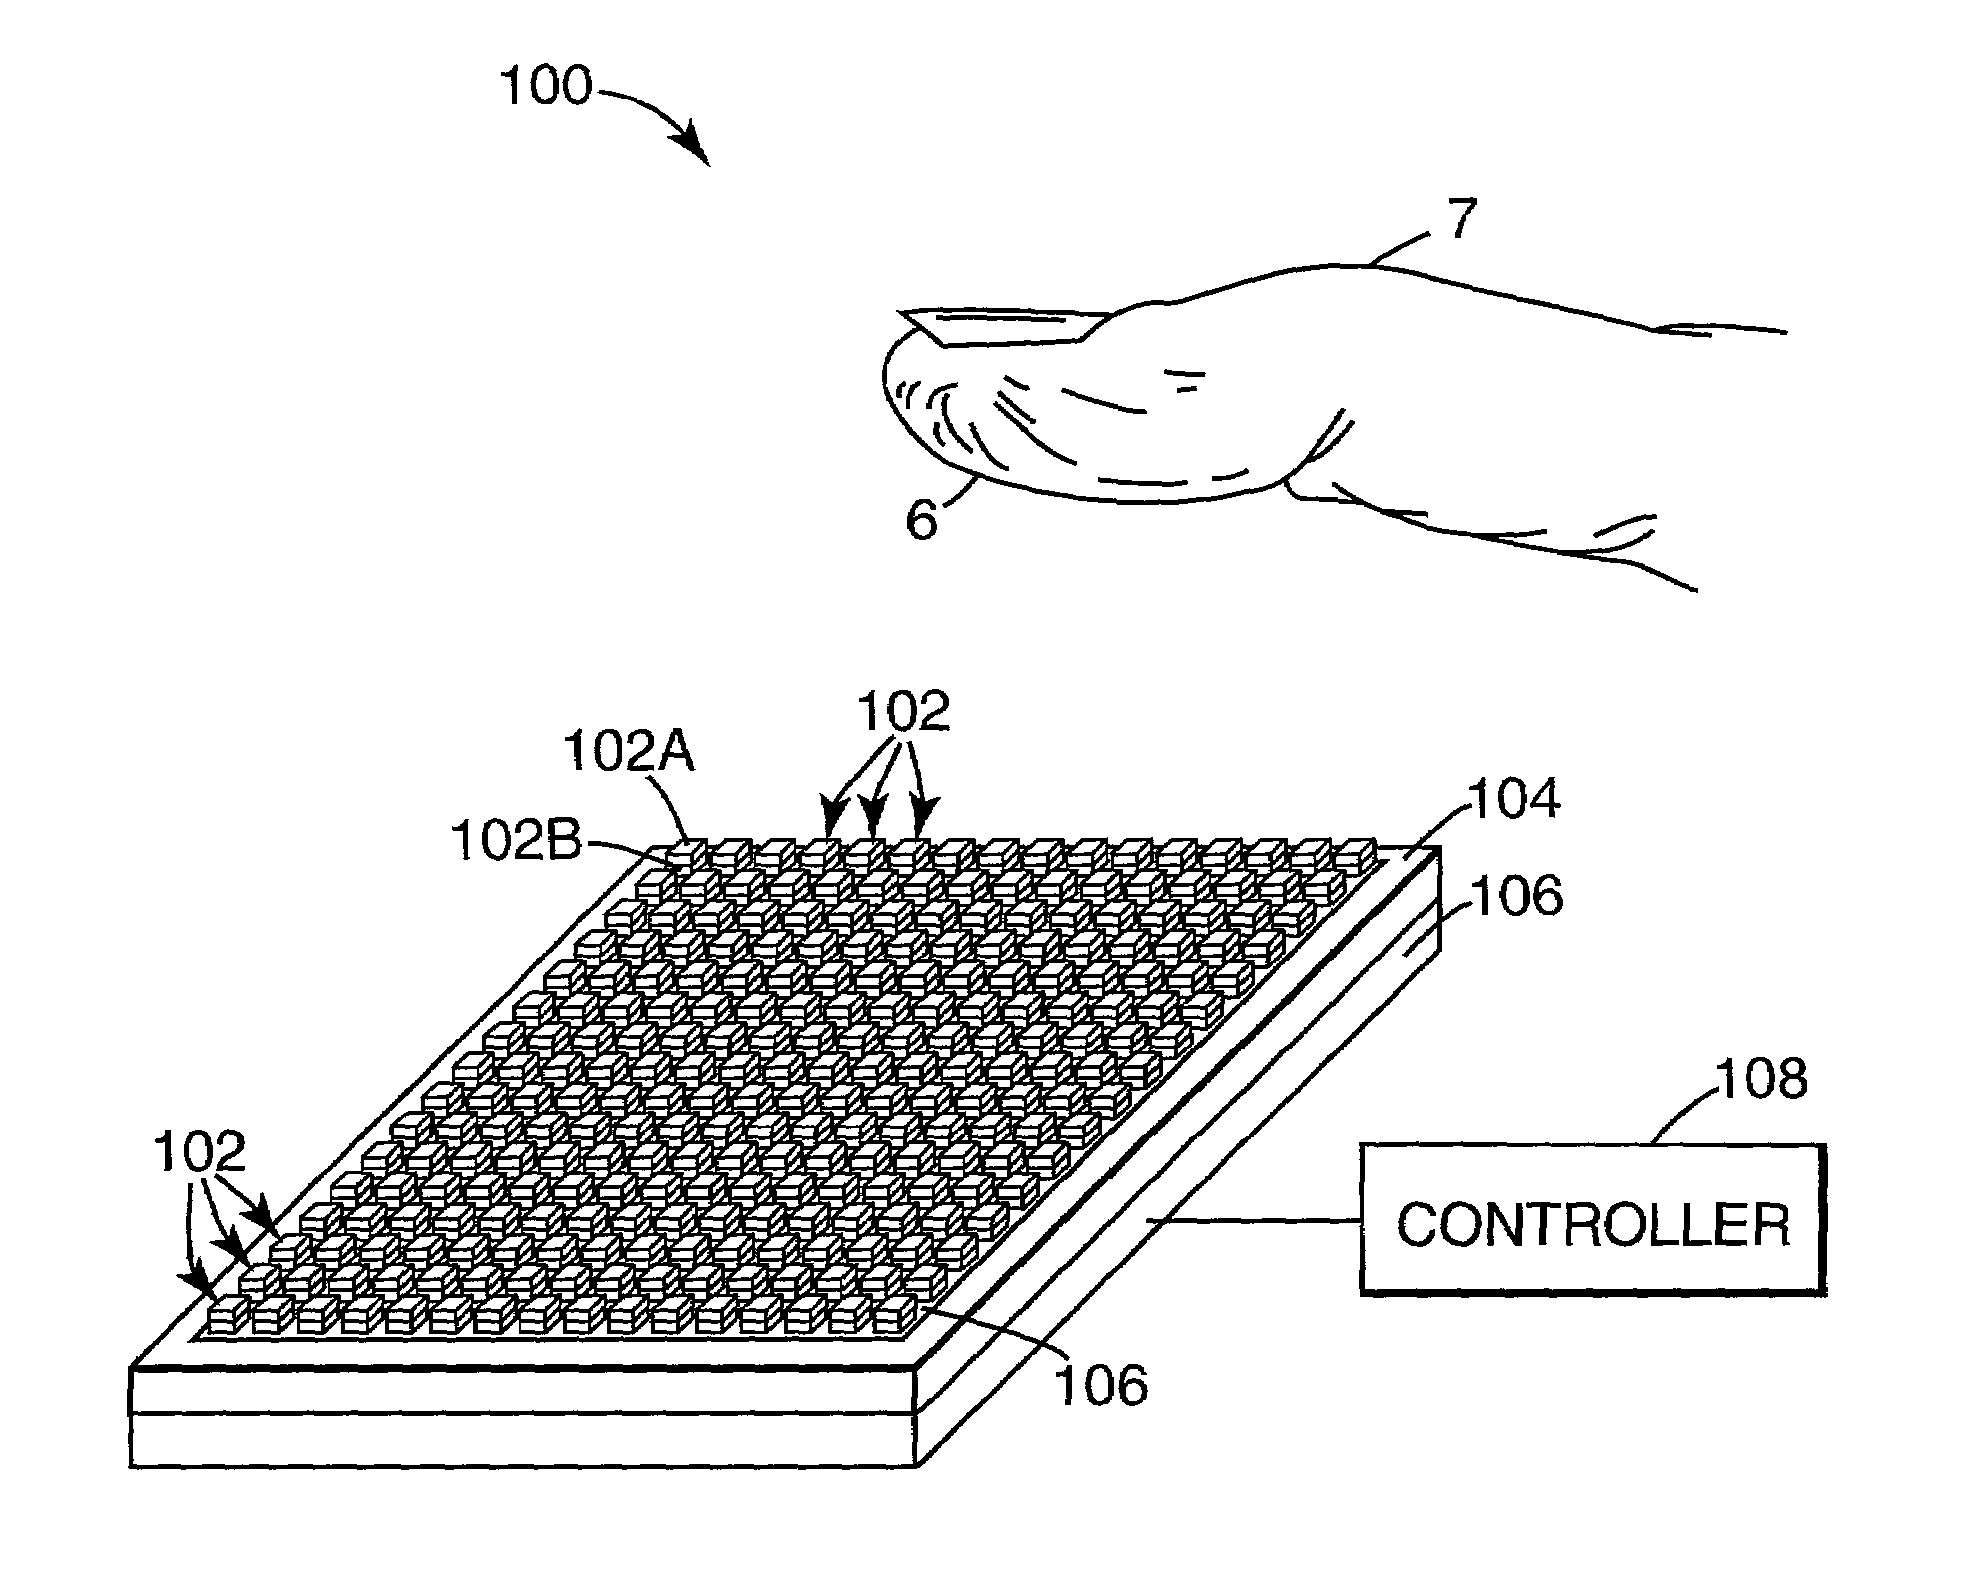 Impedance sensing screen pointing device